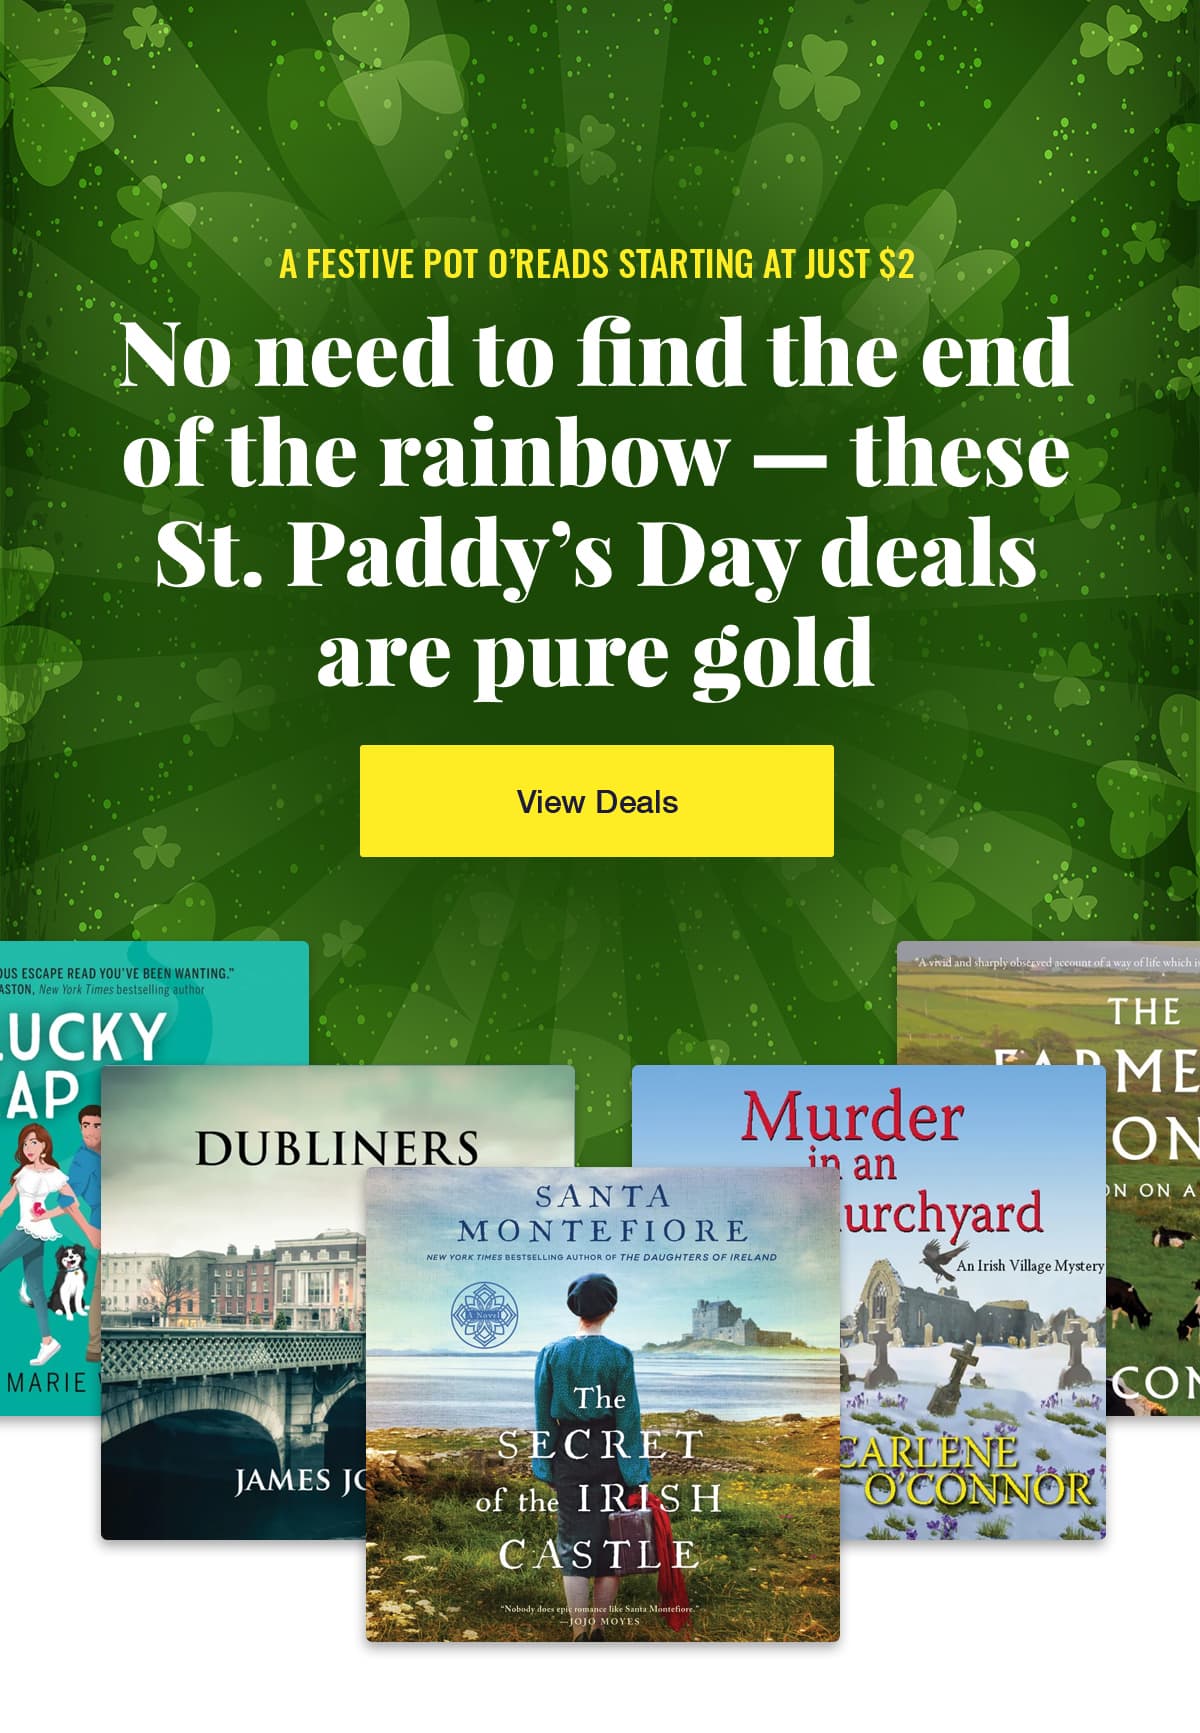 Charming St. Patrick's Day Deals